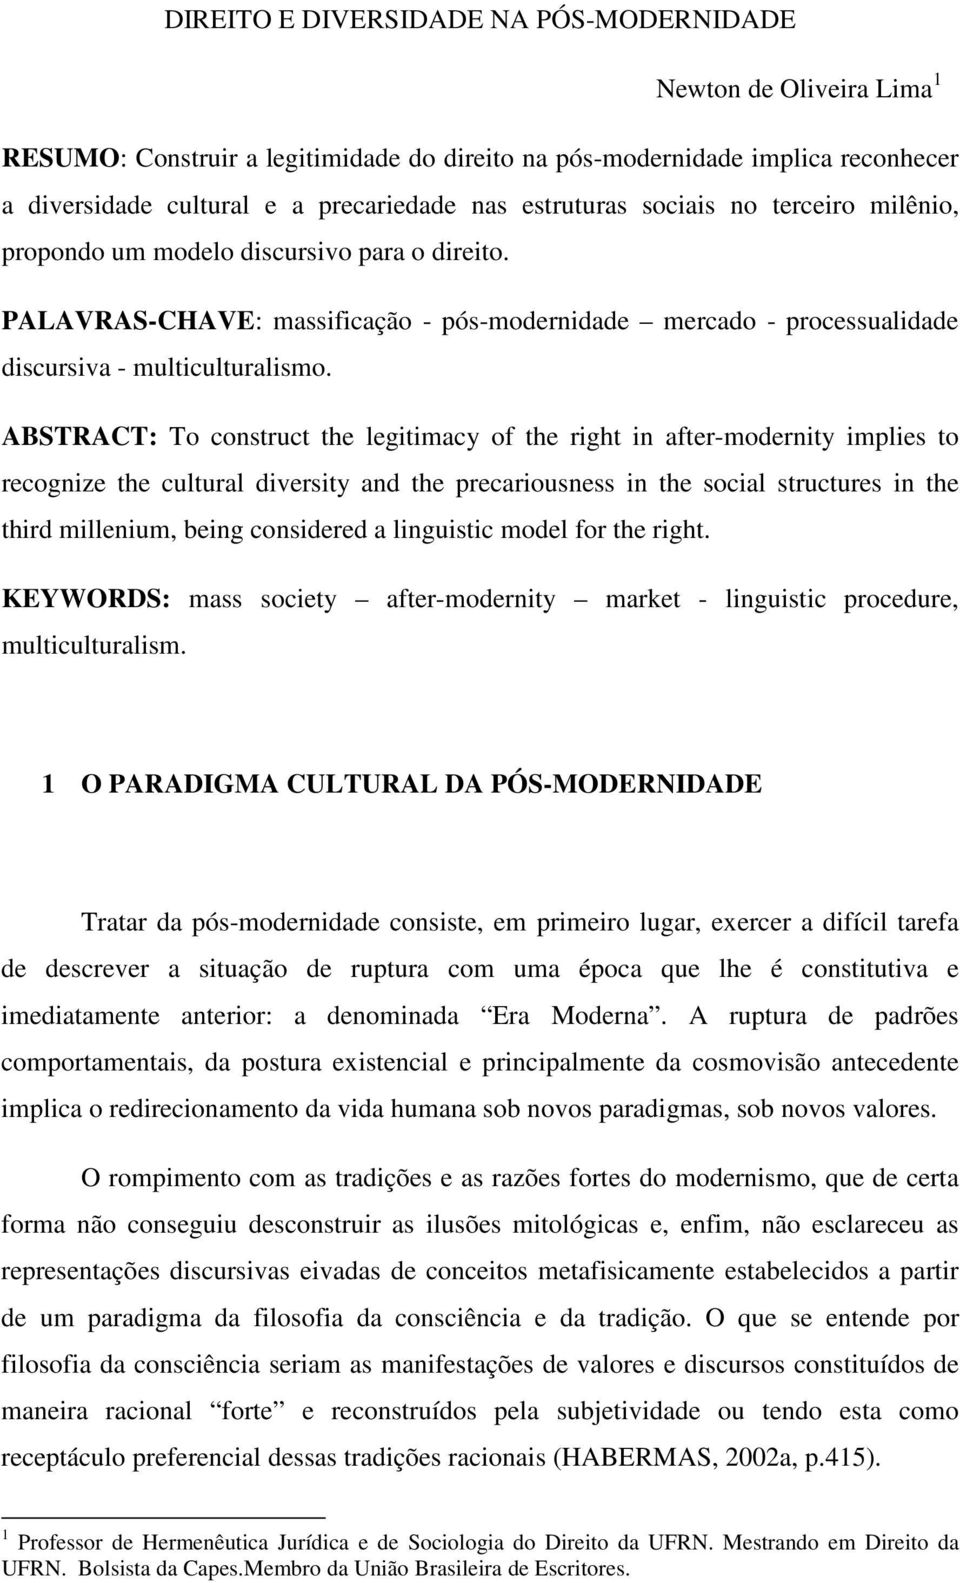 ABSTRACT: To construct the legitimacy of the right in after-modernity implies to recognize the cultural diversity and the precariousness in the social structures in the third millenium, being